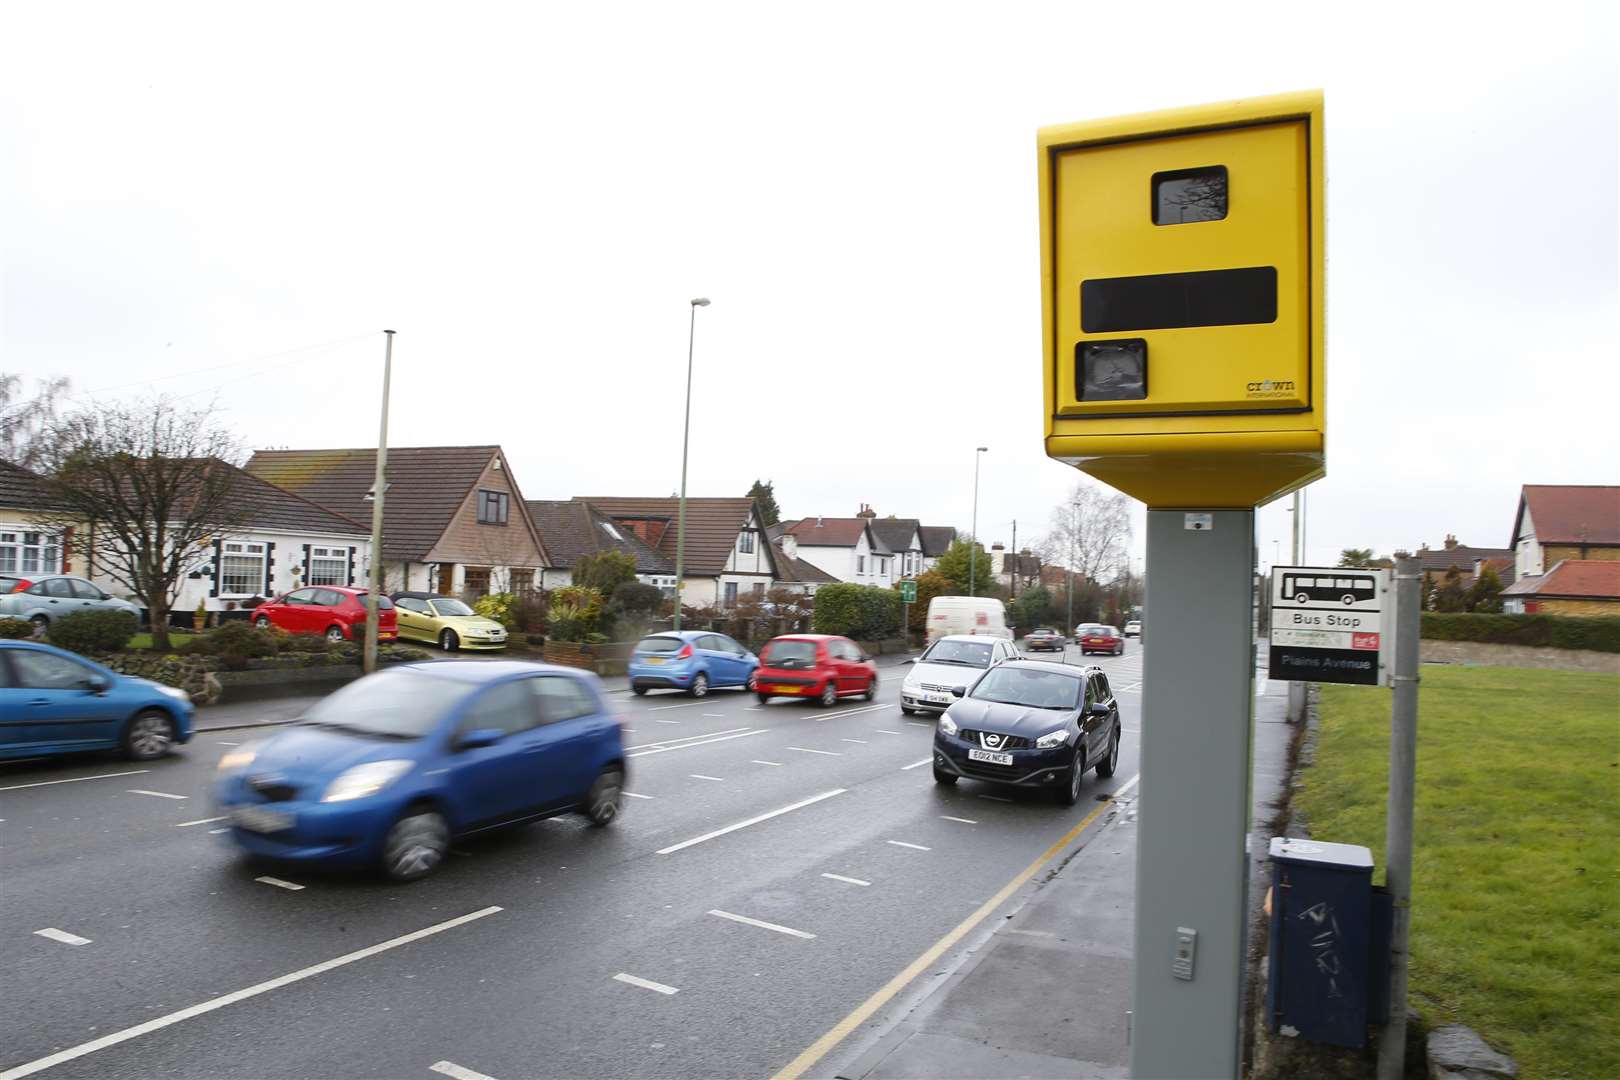 Speed cameras have caught 90,000 motorists in Kent over the last year